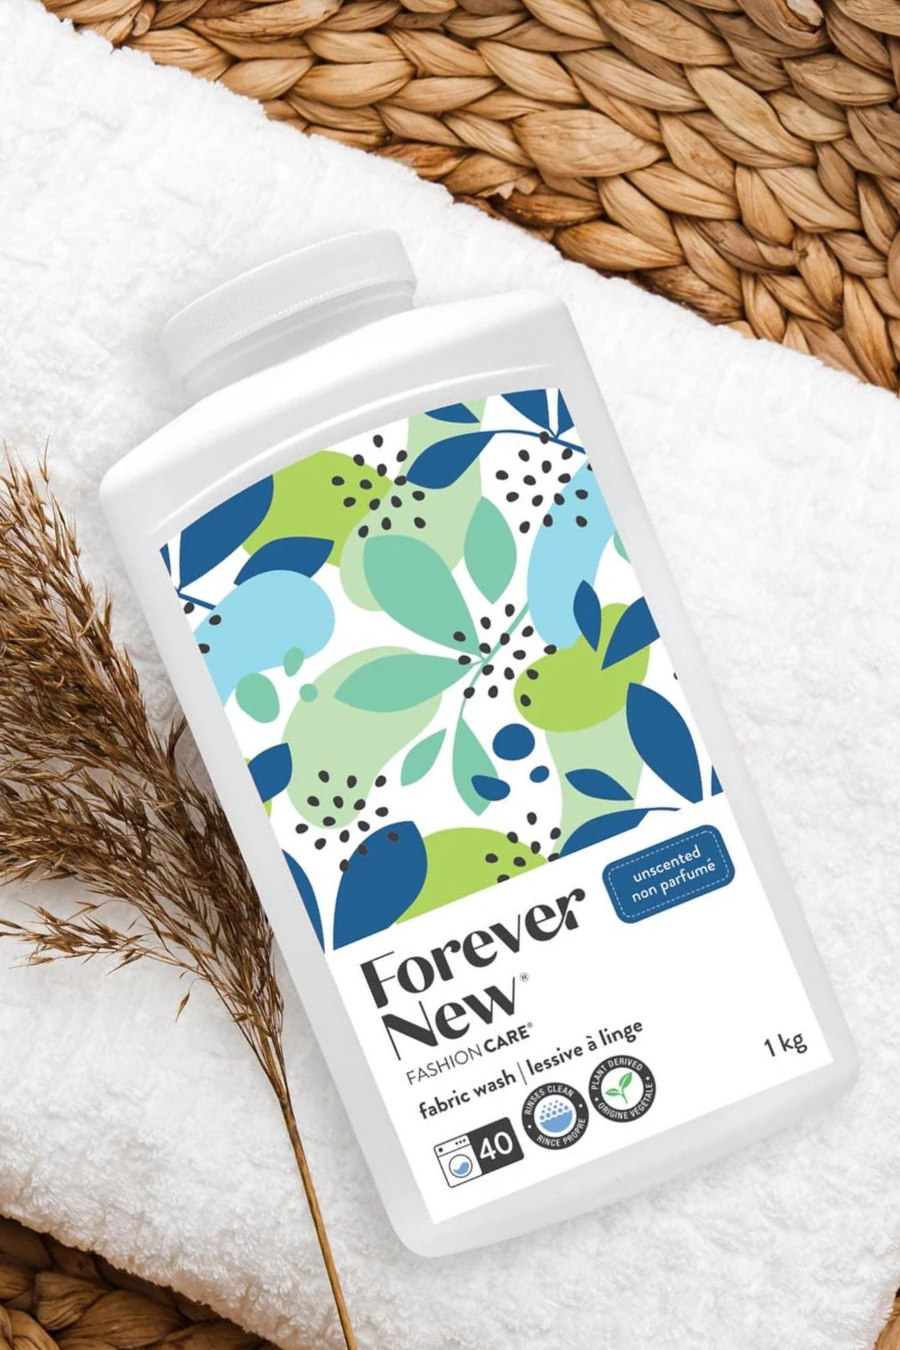 Forever New Powder Large Fabric Wash - Unscented lifestyle